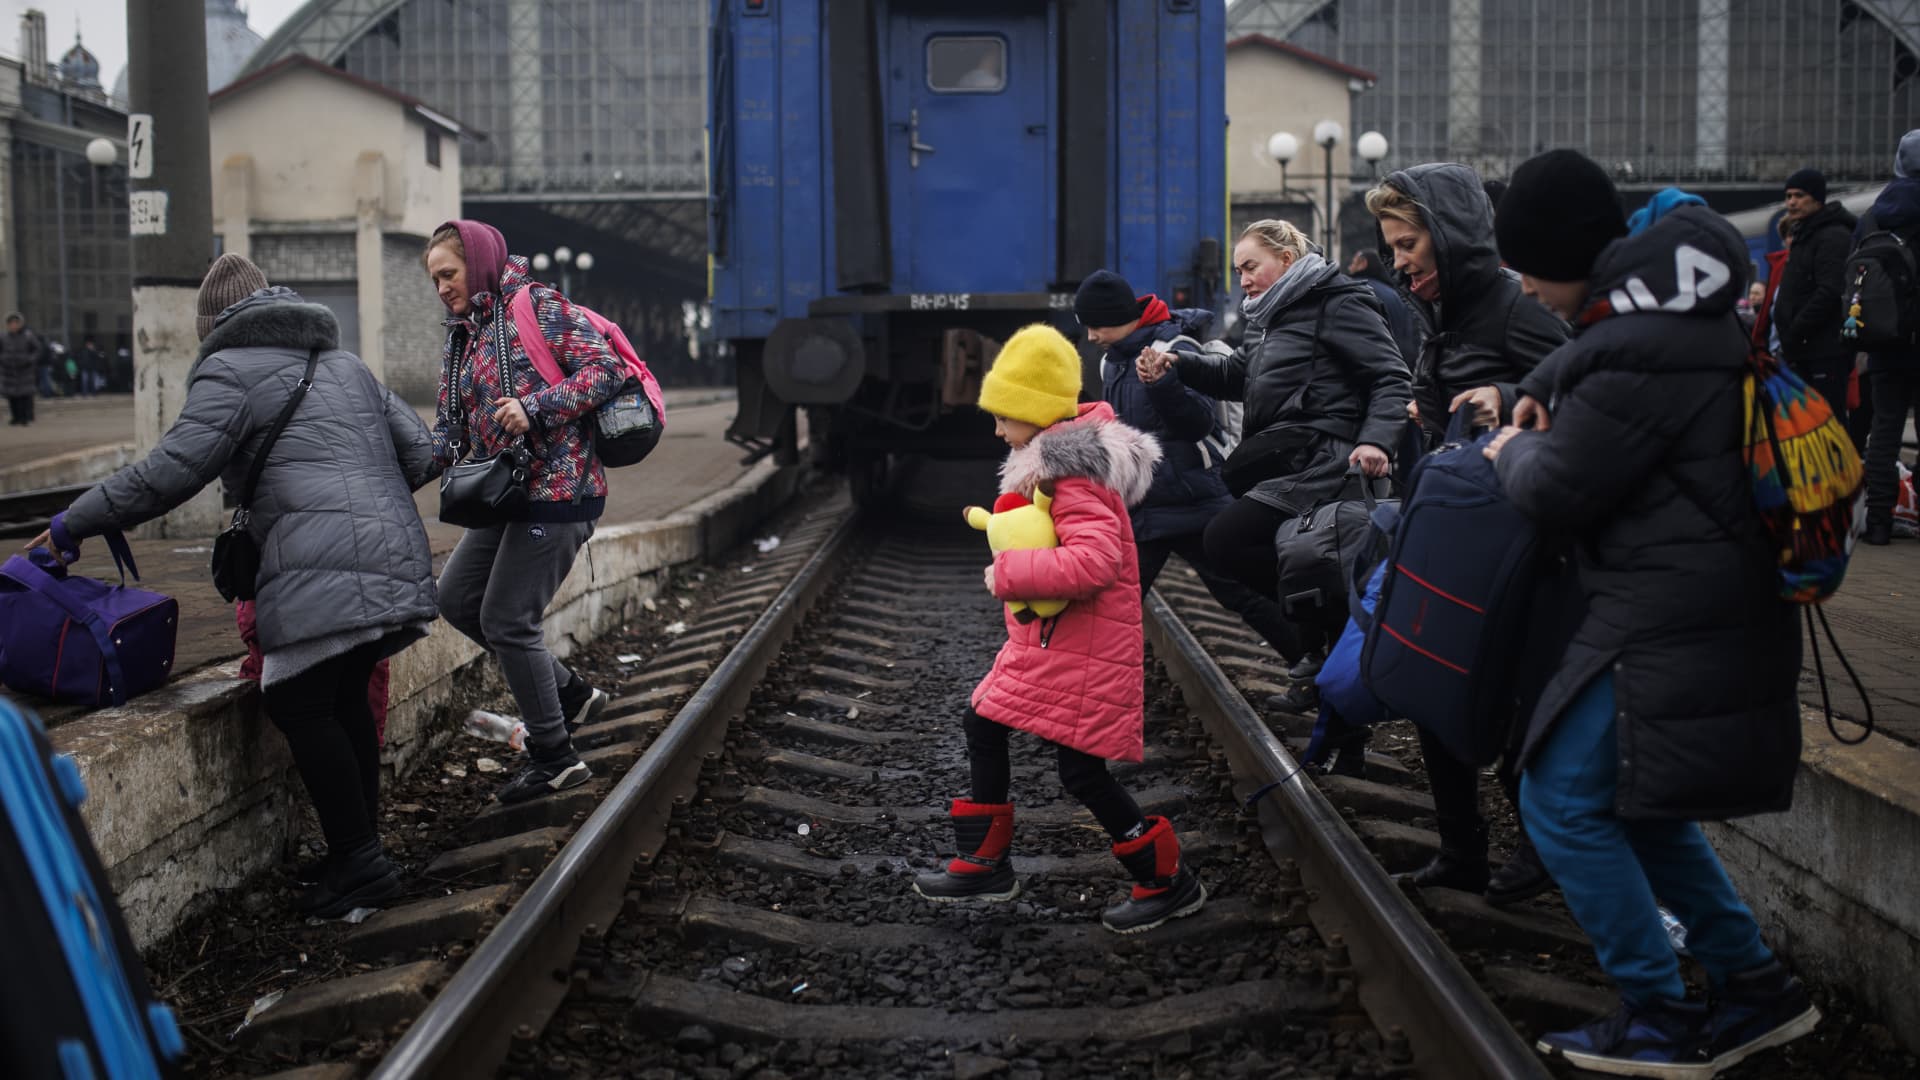 Civilians seeking to leave the city arrive at a train station in the Ukrainian city of Lviv on March 4, 2022, amid Russian attacks..